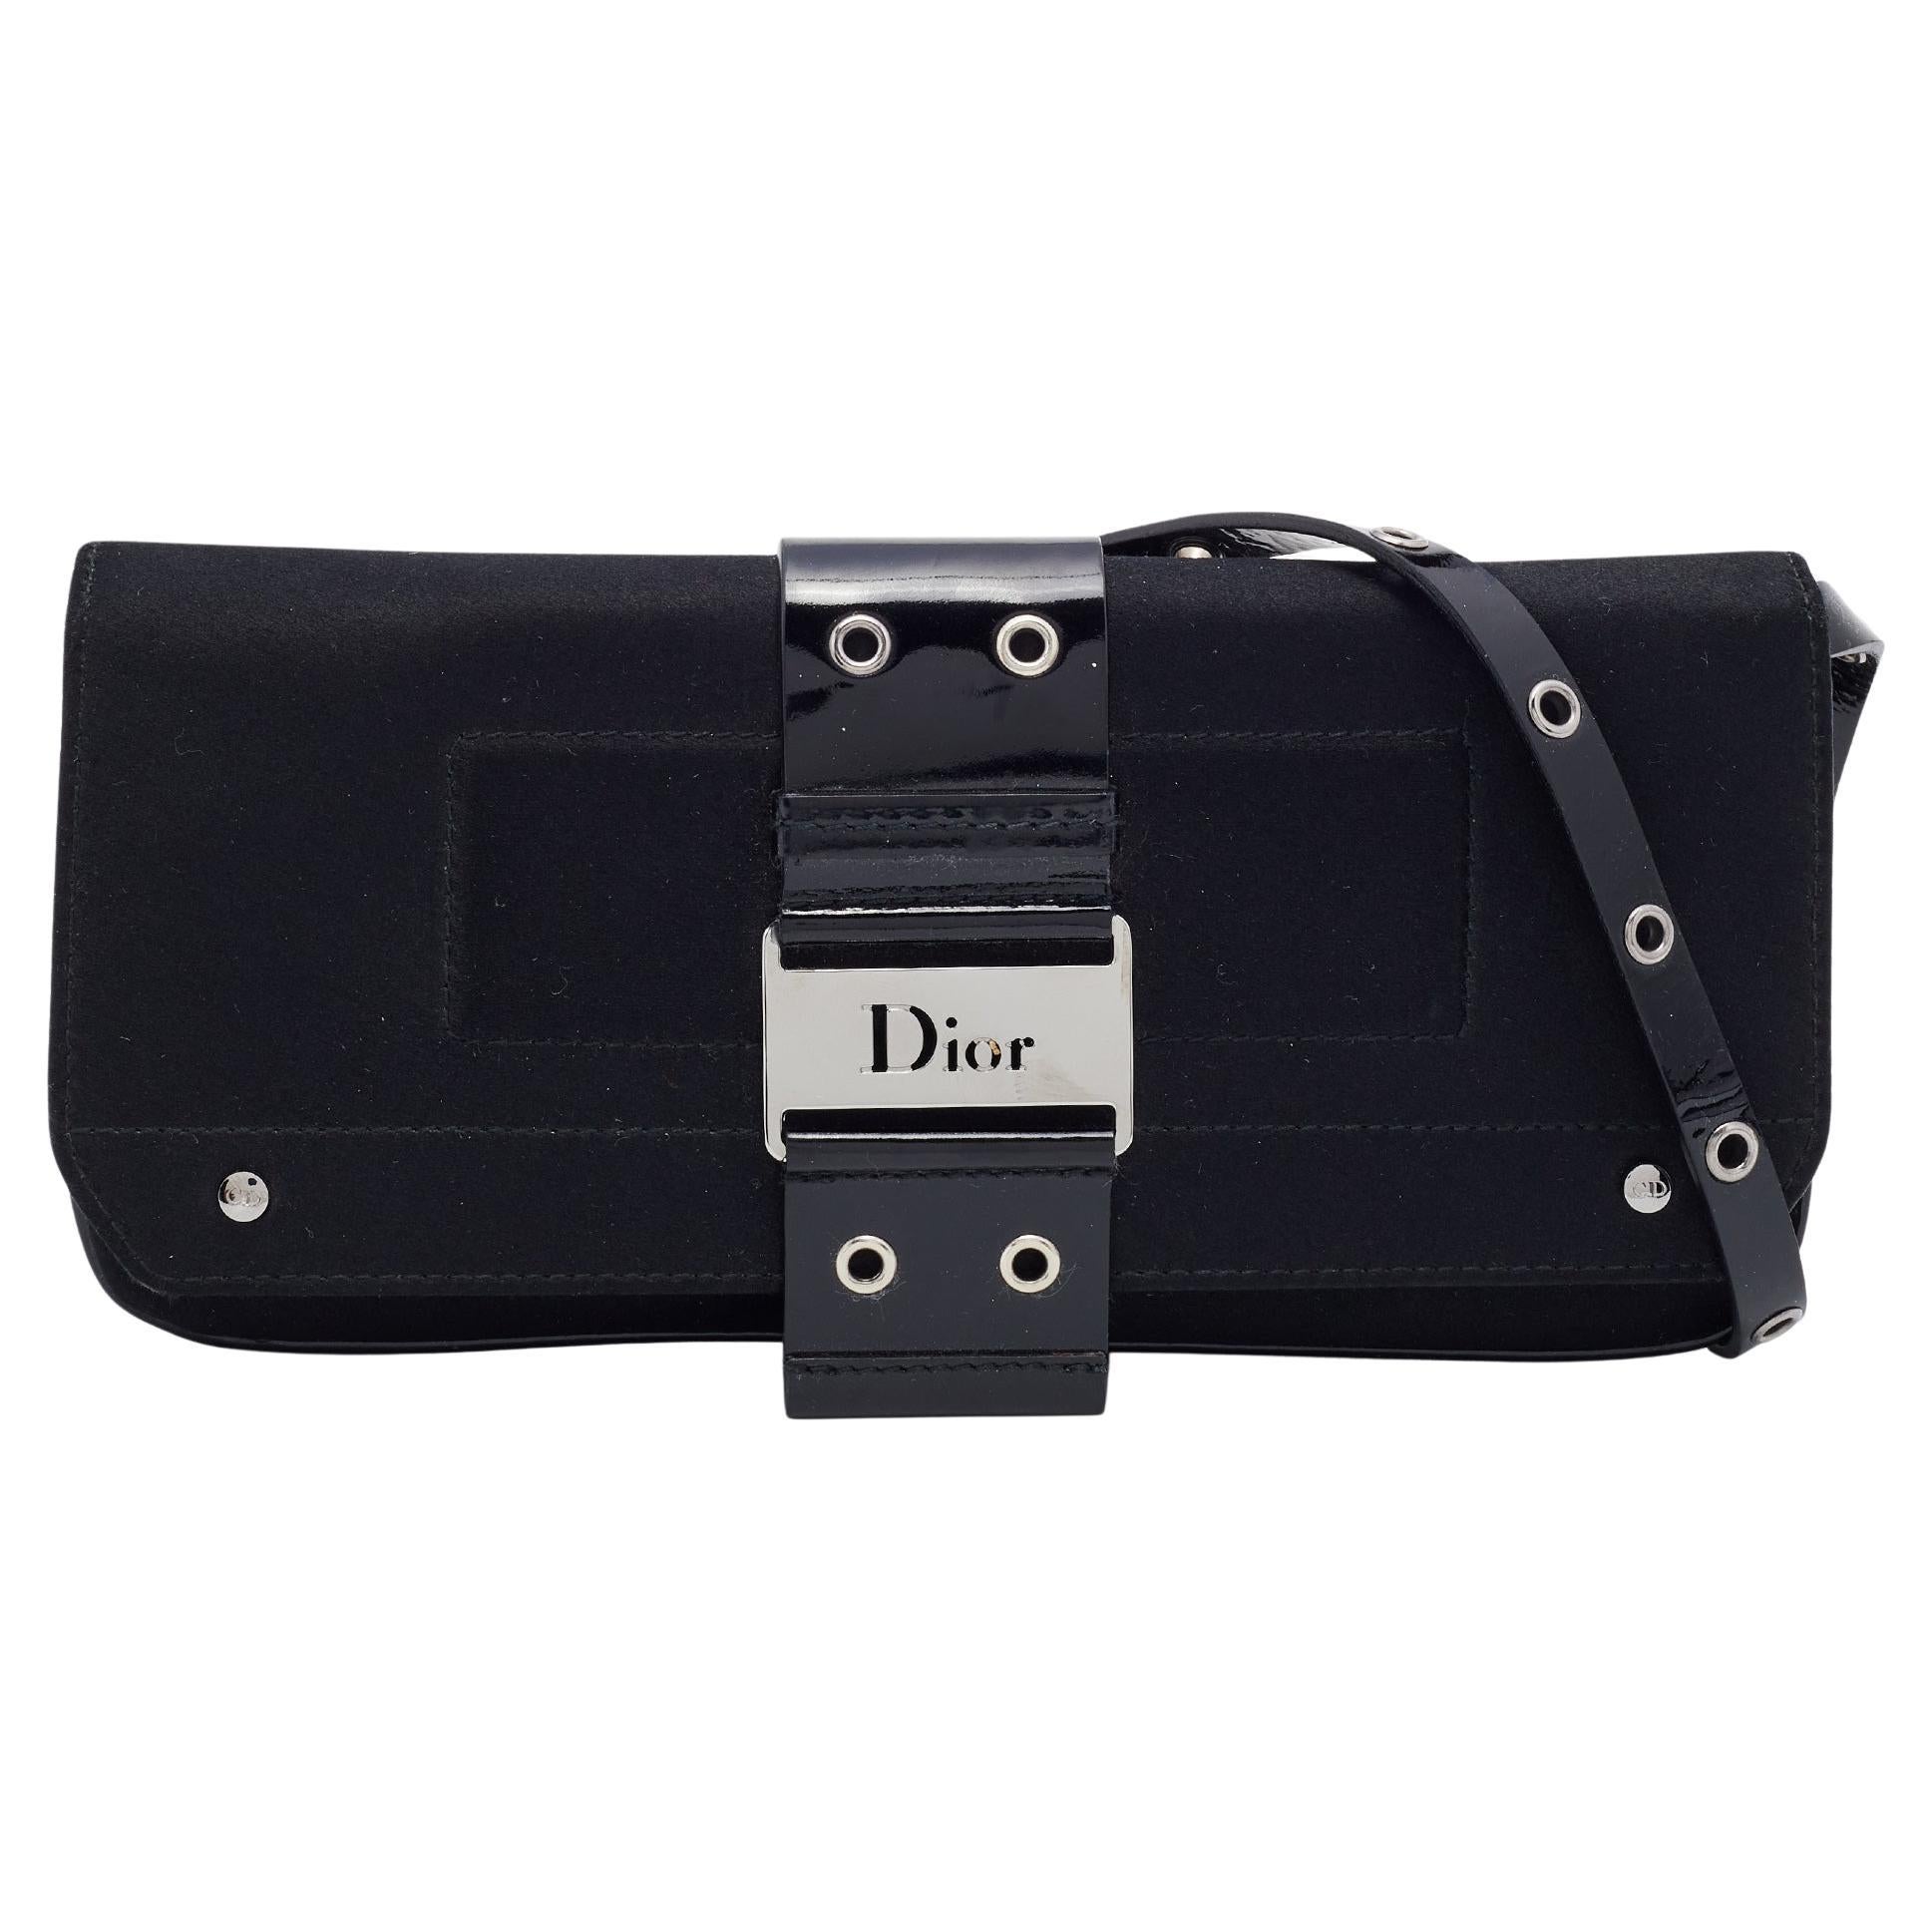 Dior Black Satin And Patent Leather Street Chic Crossbody Bag